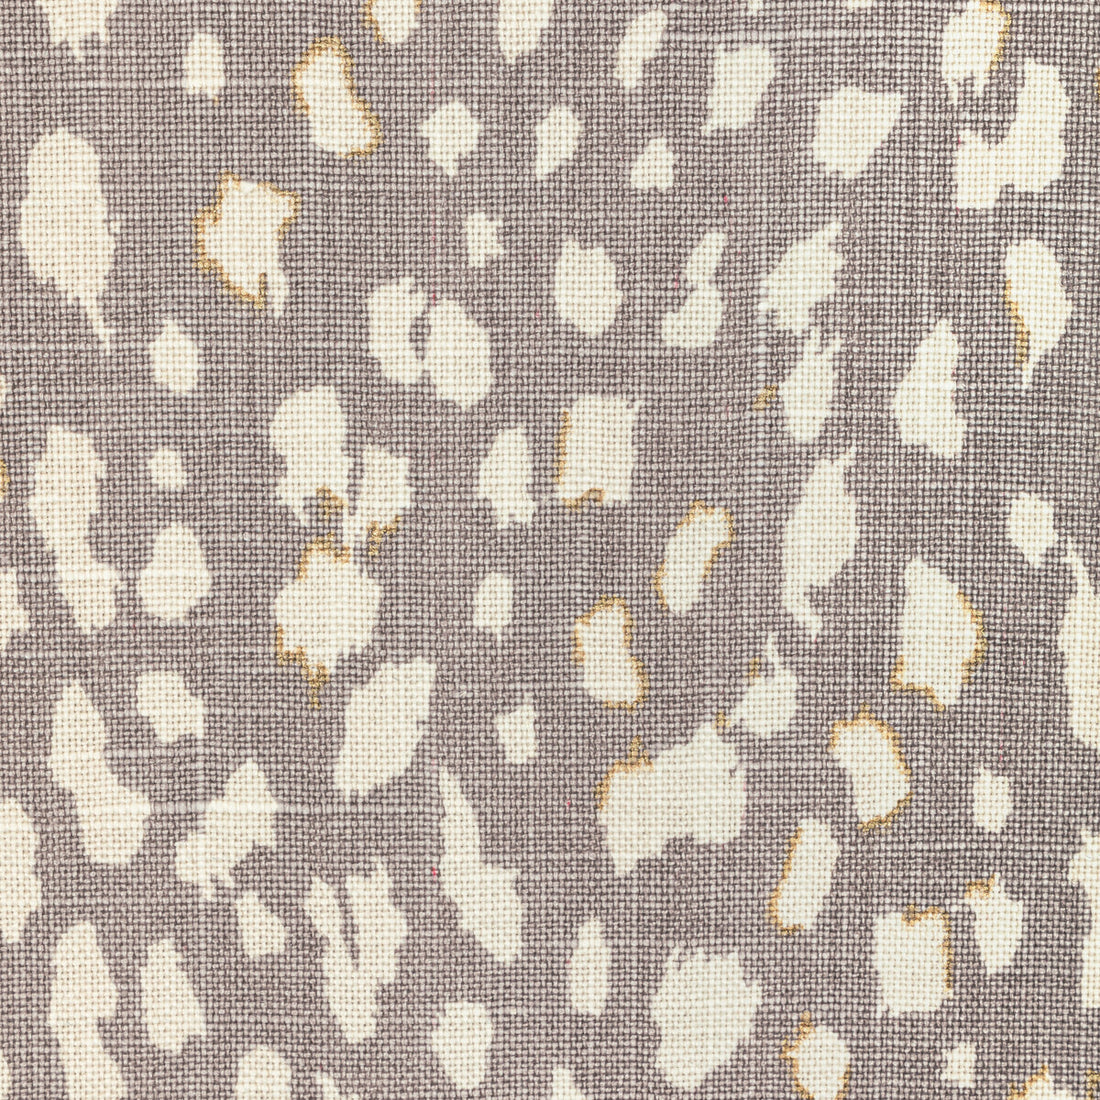 Lynx Dot fabric in lavender color - pattern LYNX DOT.1011.0 - by Kravet Couture in the Jan Showers Charmant collection